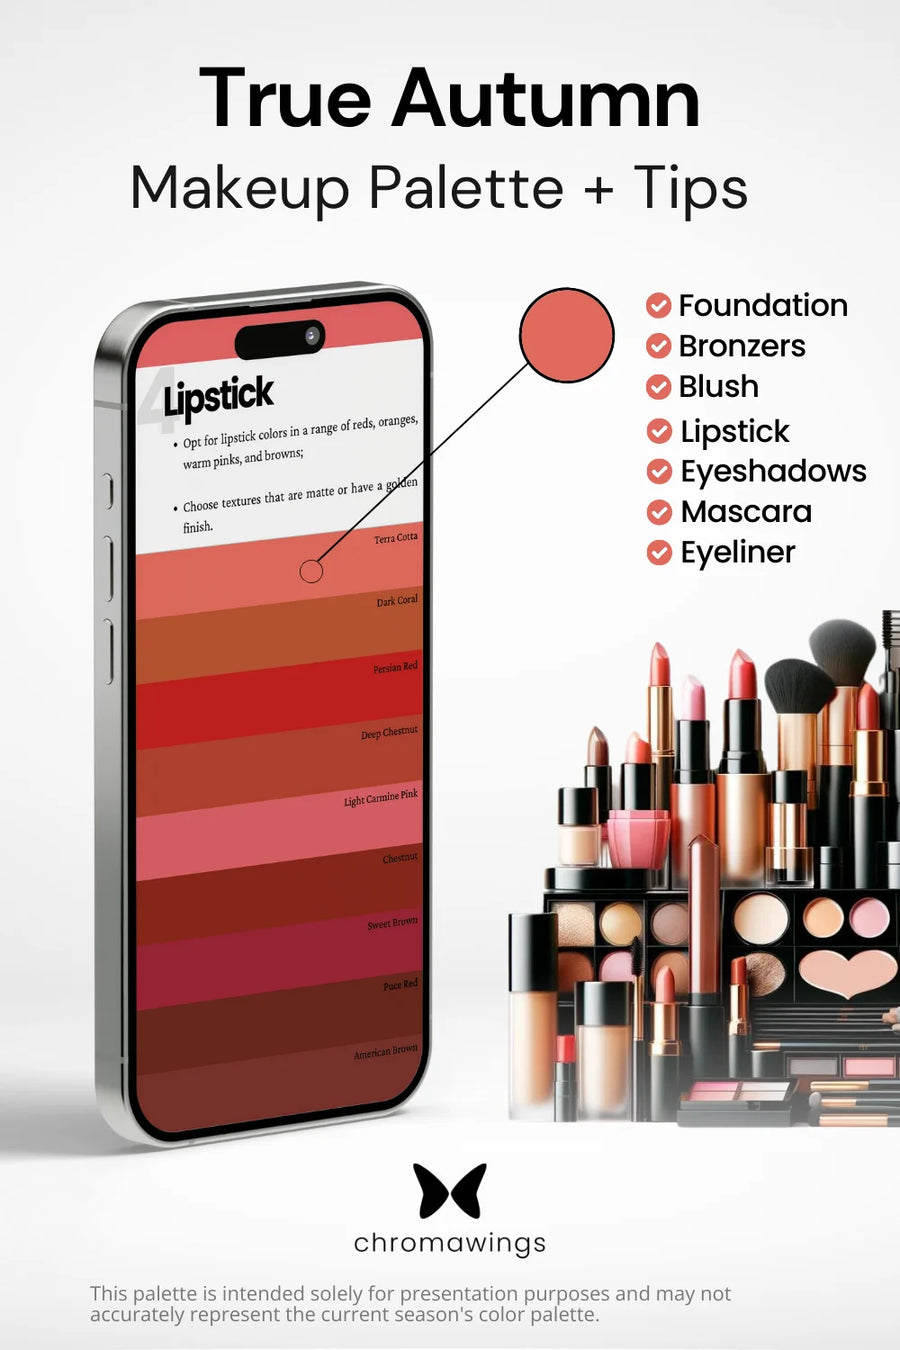 True Autumn Makeup palette on phone, color pinpointed. Palette title, makeup types listed, shelf image.